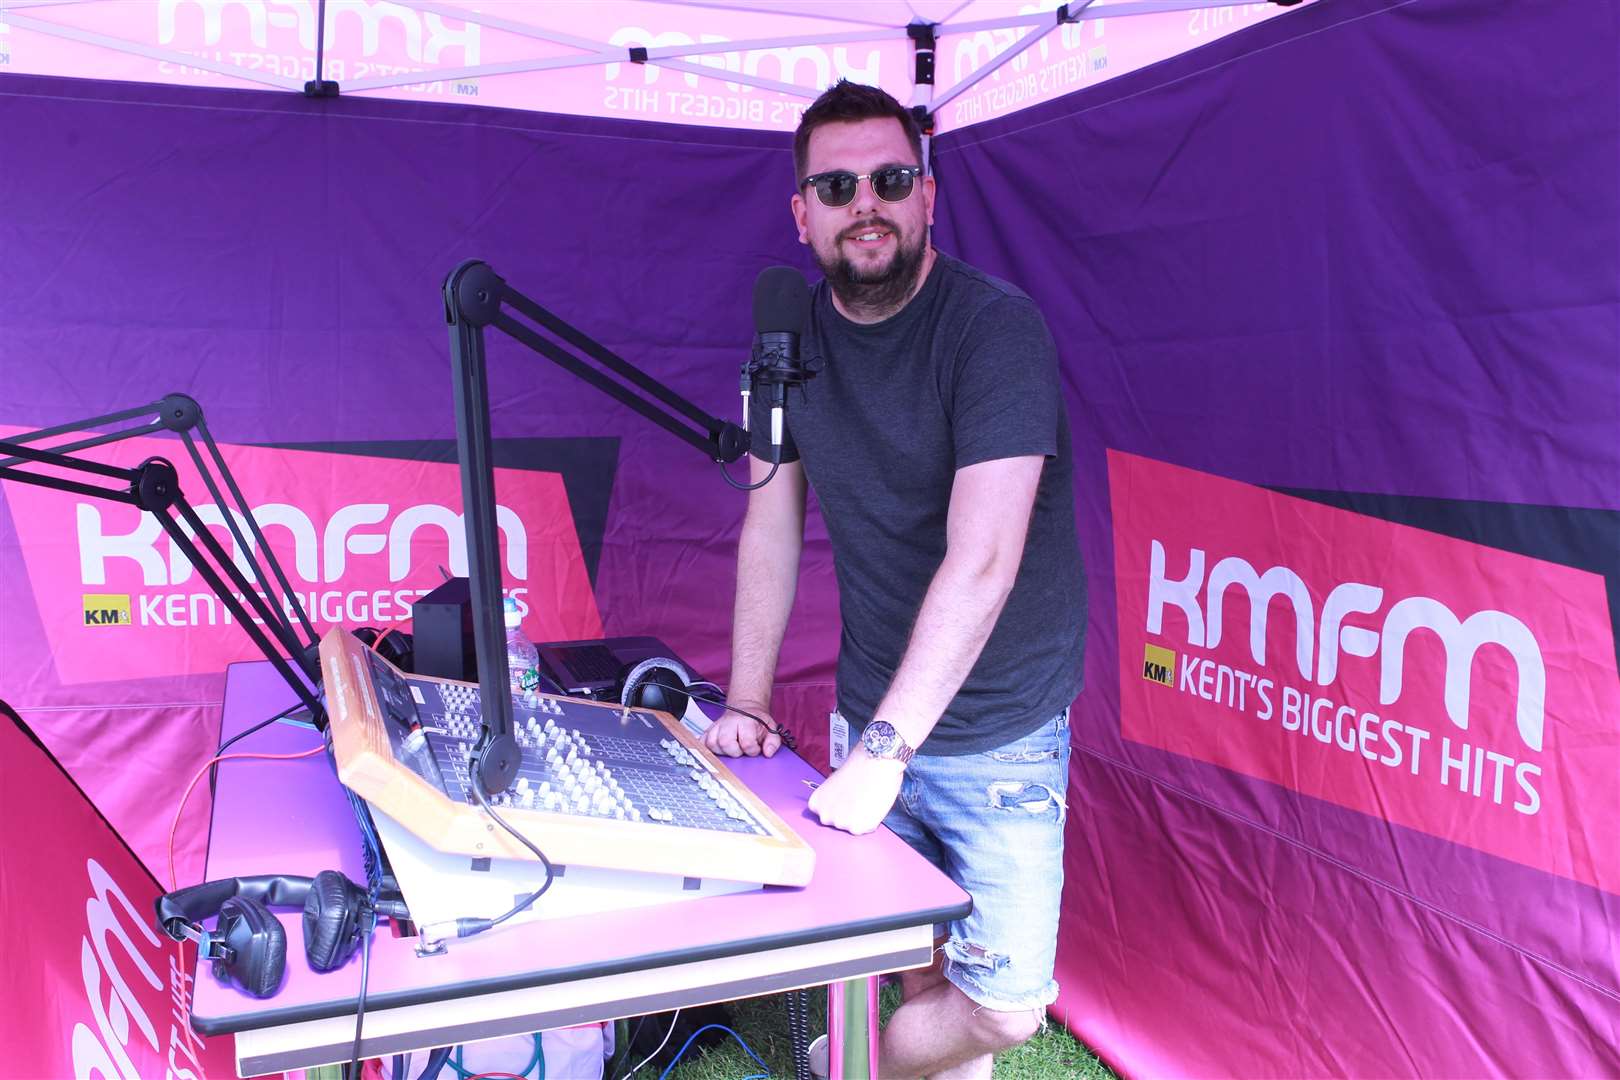 kmfm Drivetime presenter Rob Wills at the Kent County Show